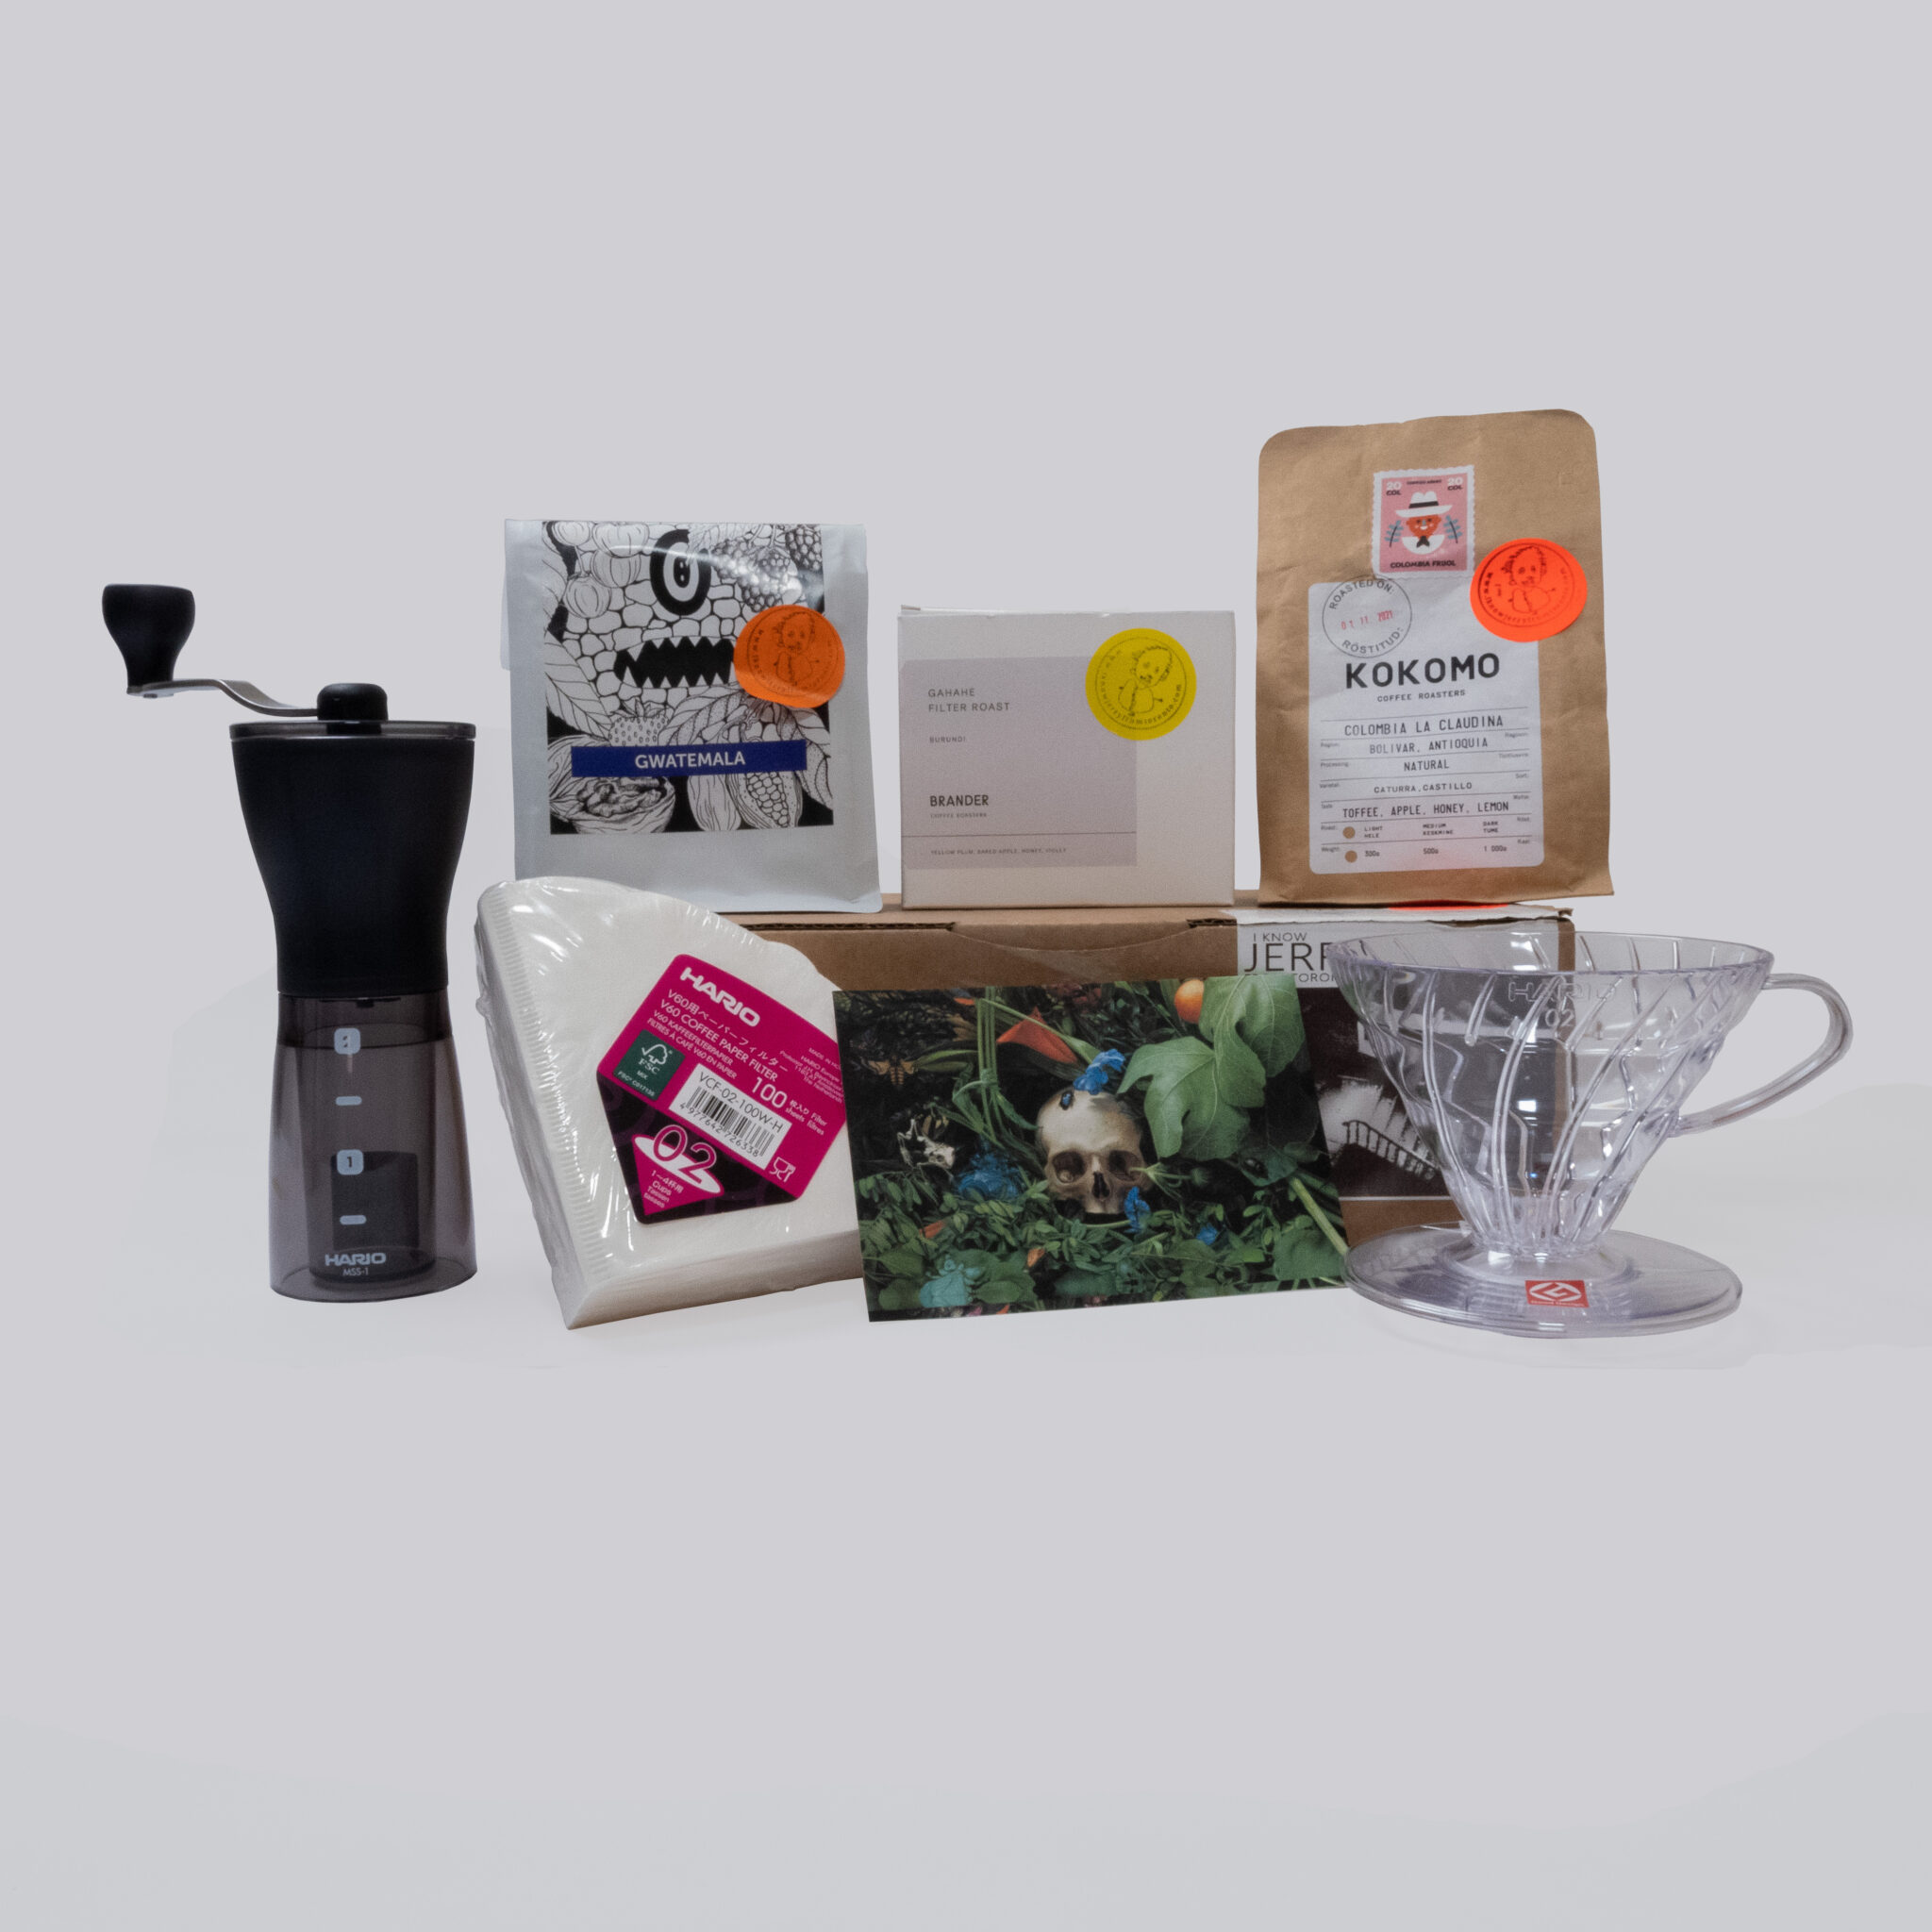 Packshot of the Full Summit Coffee box with coffee from Kokomo, Brander, Coffee Proficiency and an artwork of Cindy Wright, a Hario grinder, Plastic V60 dripper and a pack of V60-02 paper filters